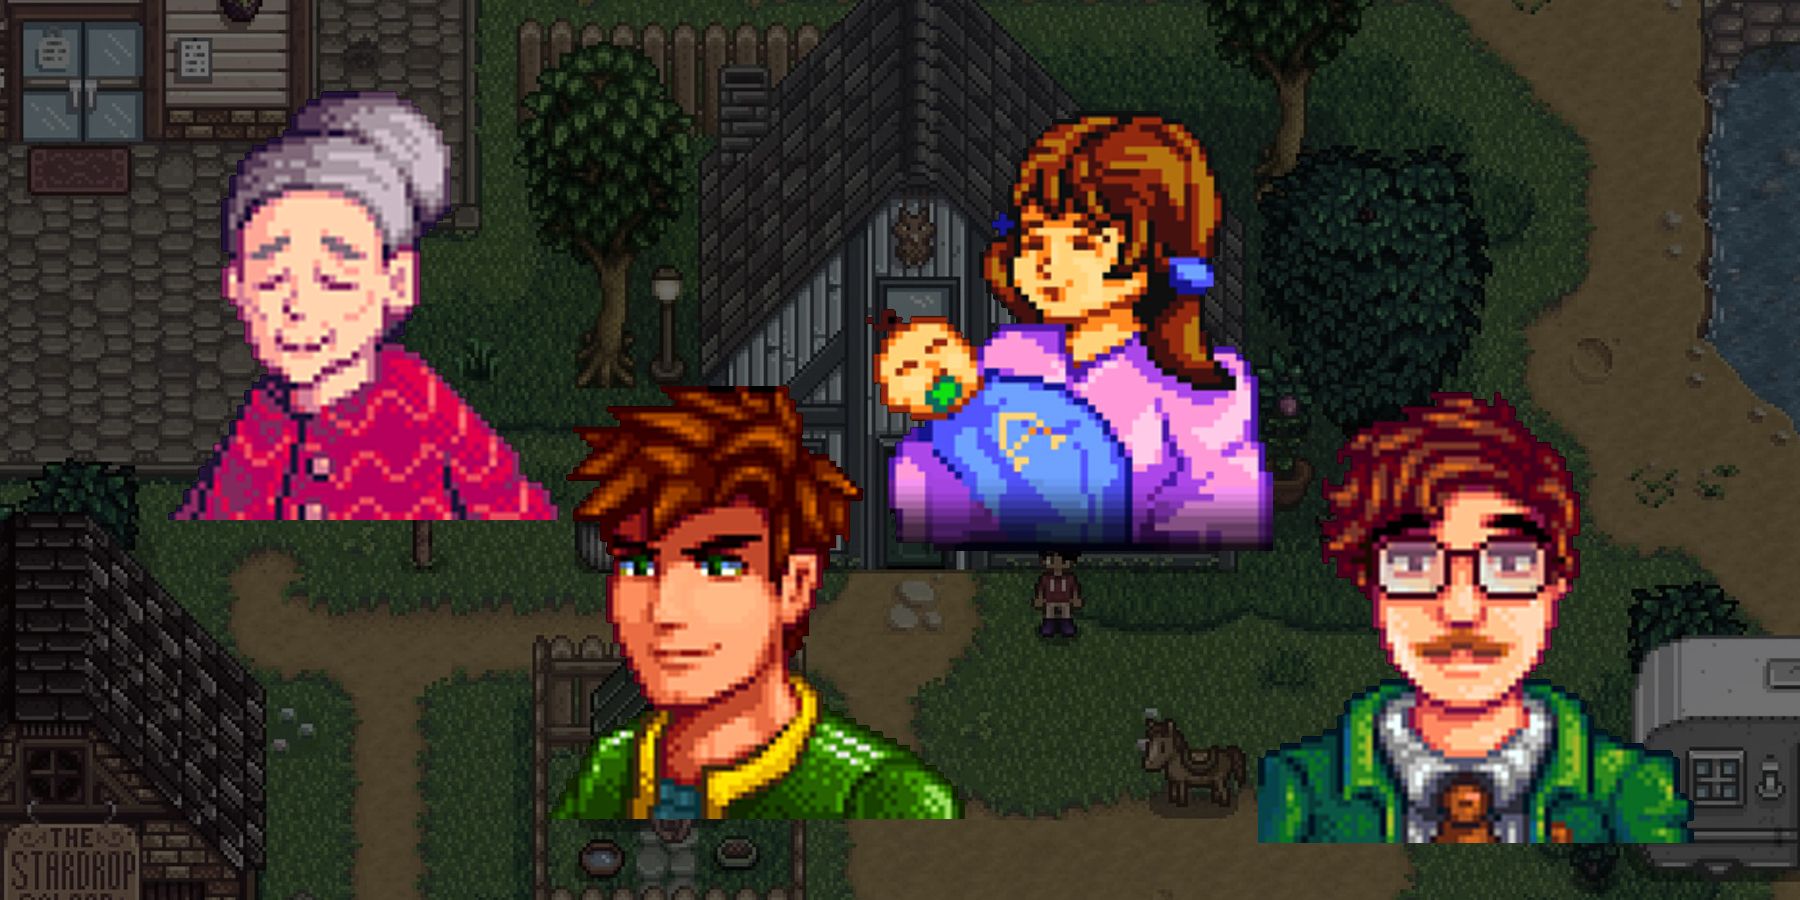 The Connections of George in Stardew Valley